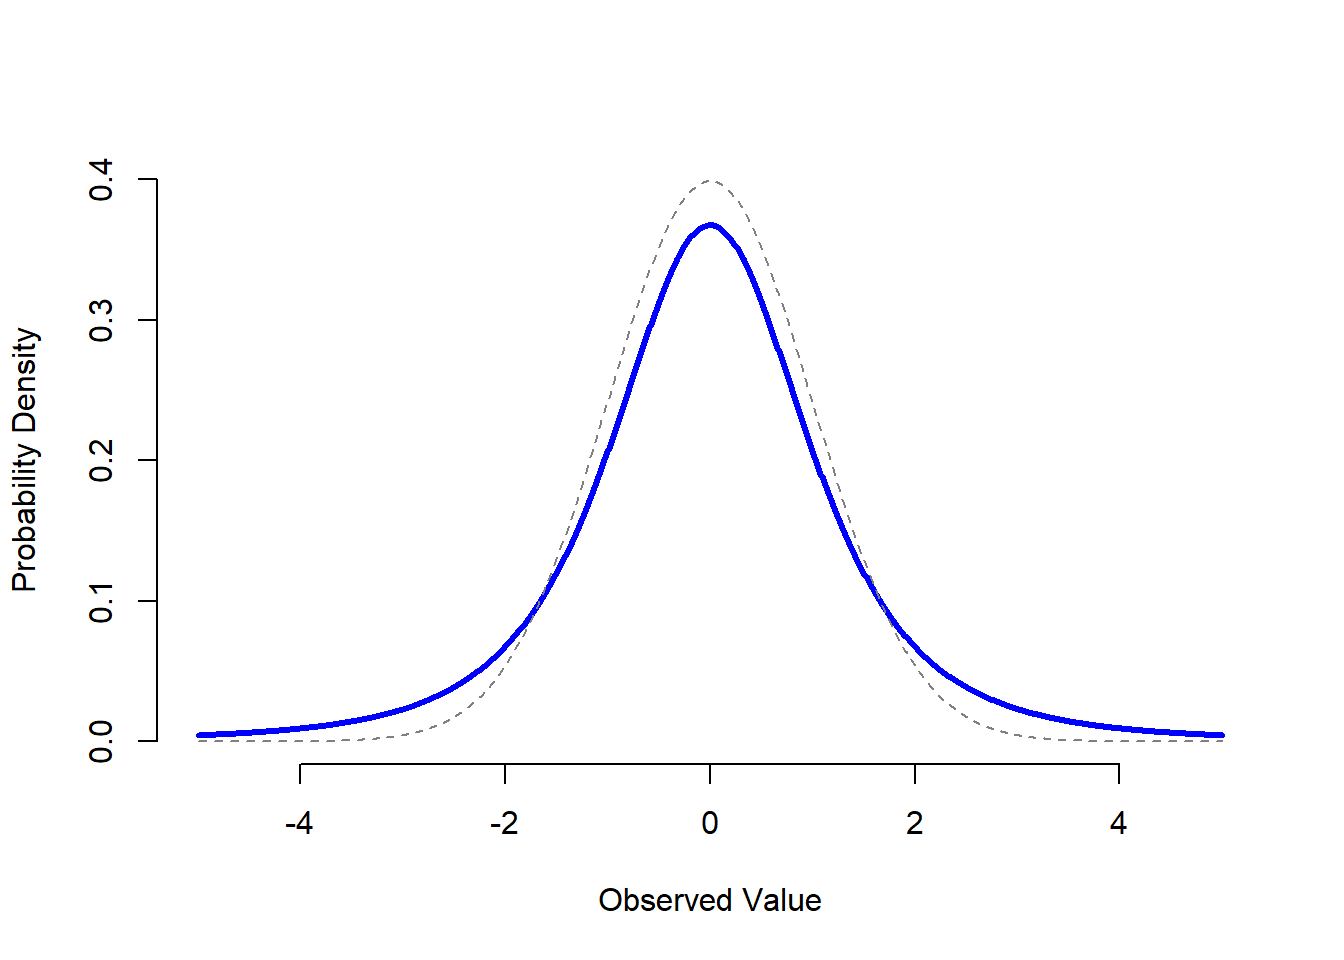 A $t$ distribution with 3 degrees of freedom (solid line). It looks similar to a normal distribution, but it's not quite the same. For comparison purposes, I've plotted a standard normal distribution as the dashed line. Note that the "tails" of the $t$ distribution are "heavier" (i.e., extend further outwards) than the tails of the normal distribution? That's the important difference between the two. 